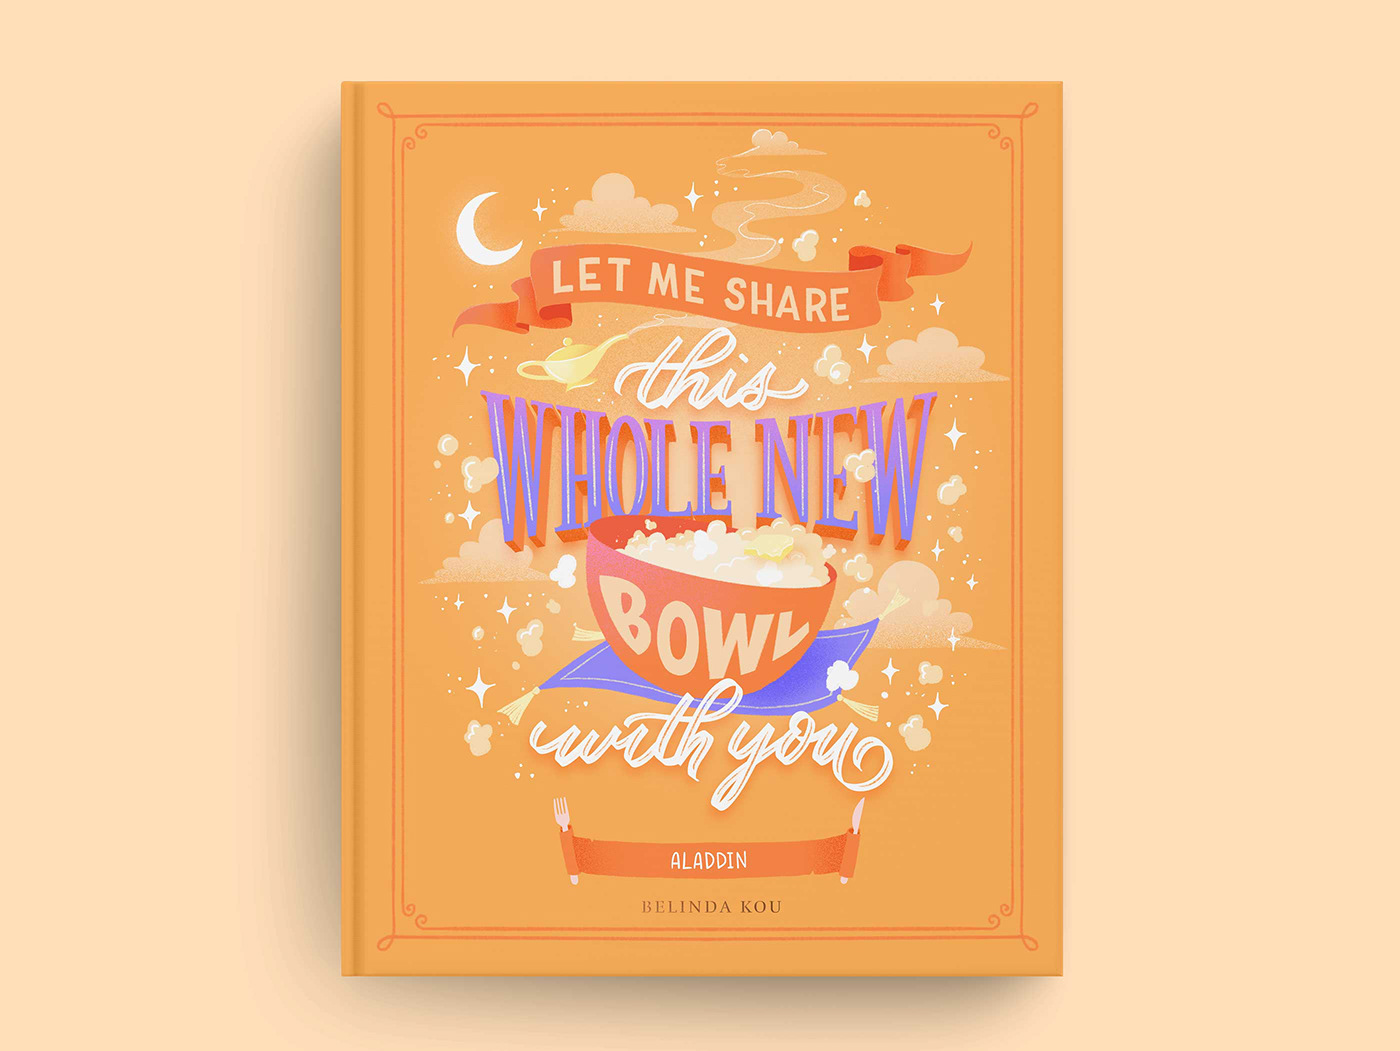 Aladdin book cover art featuring hand lettering and illustrations of fairy tale and food art